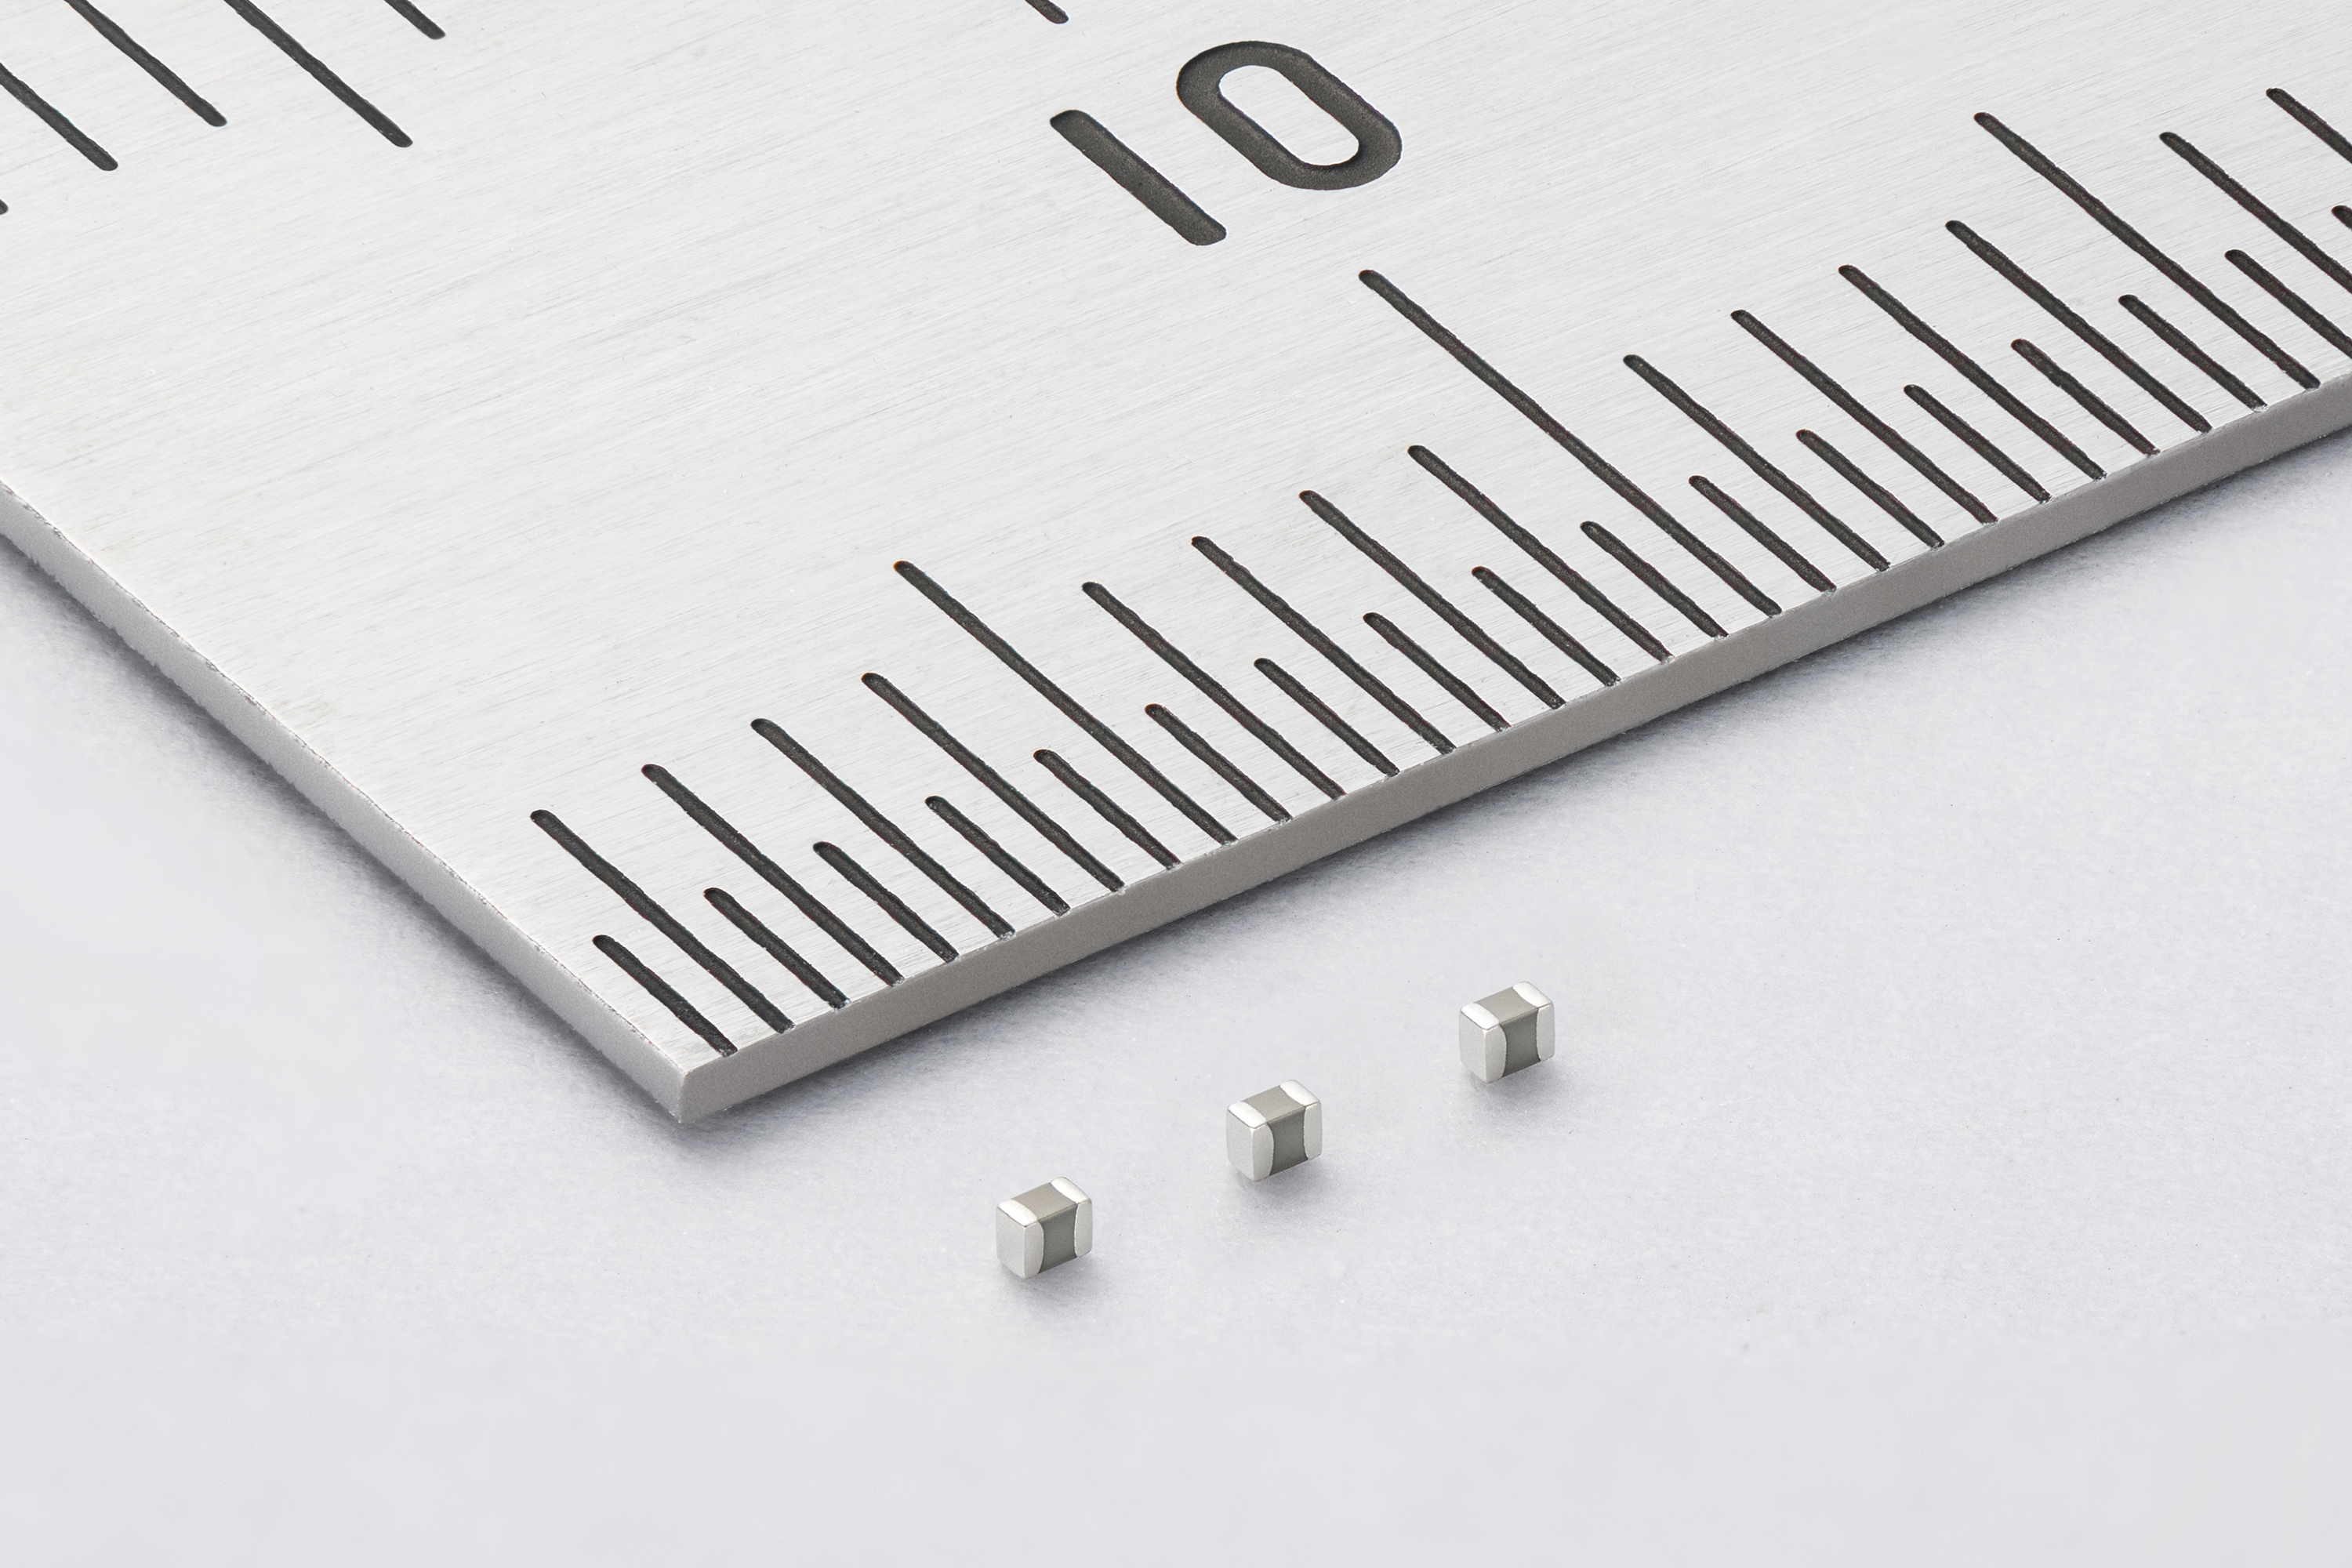 Murata Successfully Raises Capacitance Per Unit Area Benchmark with Industry-Leading 10μF MLCCs